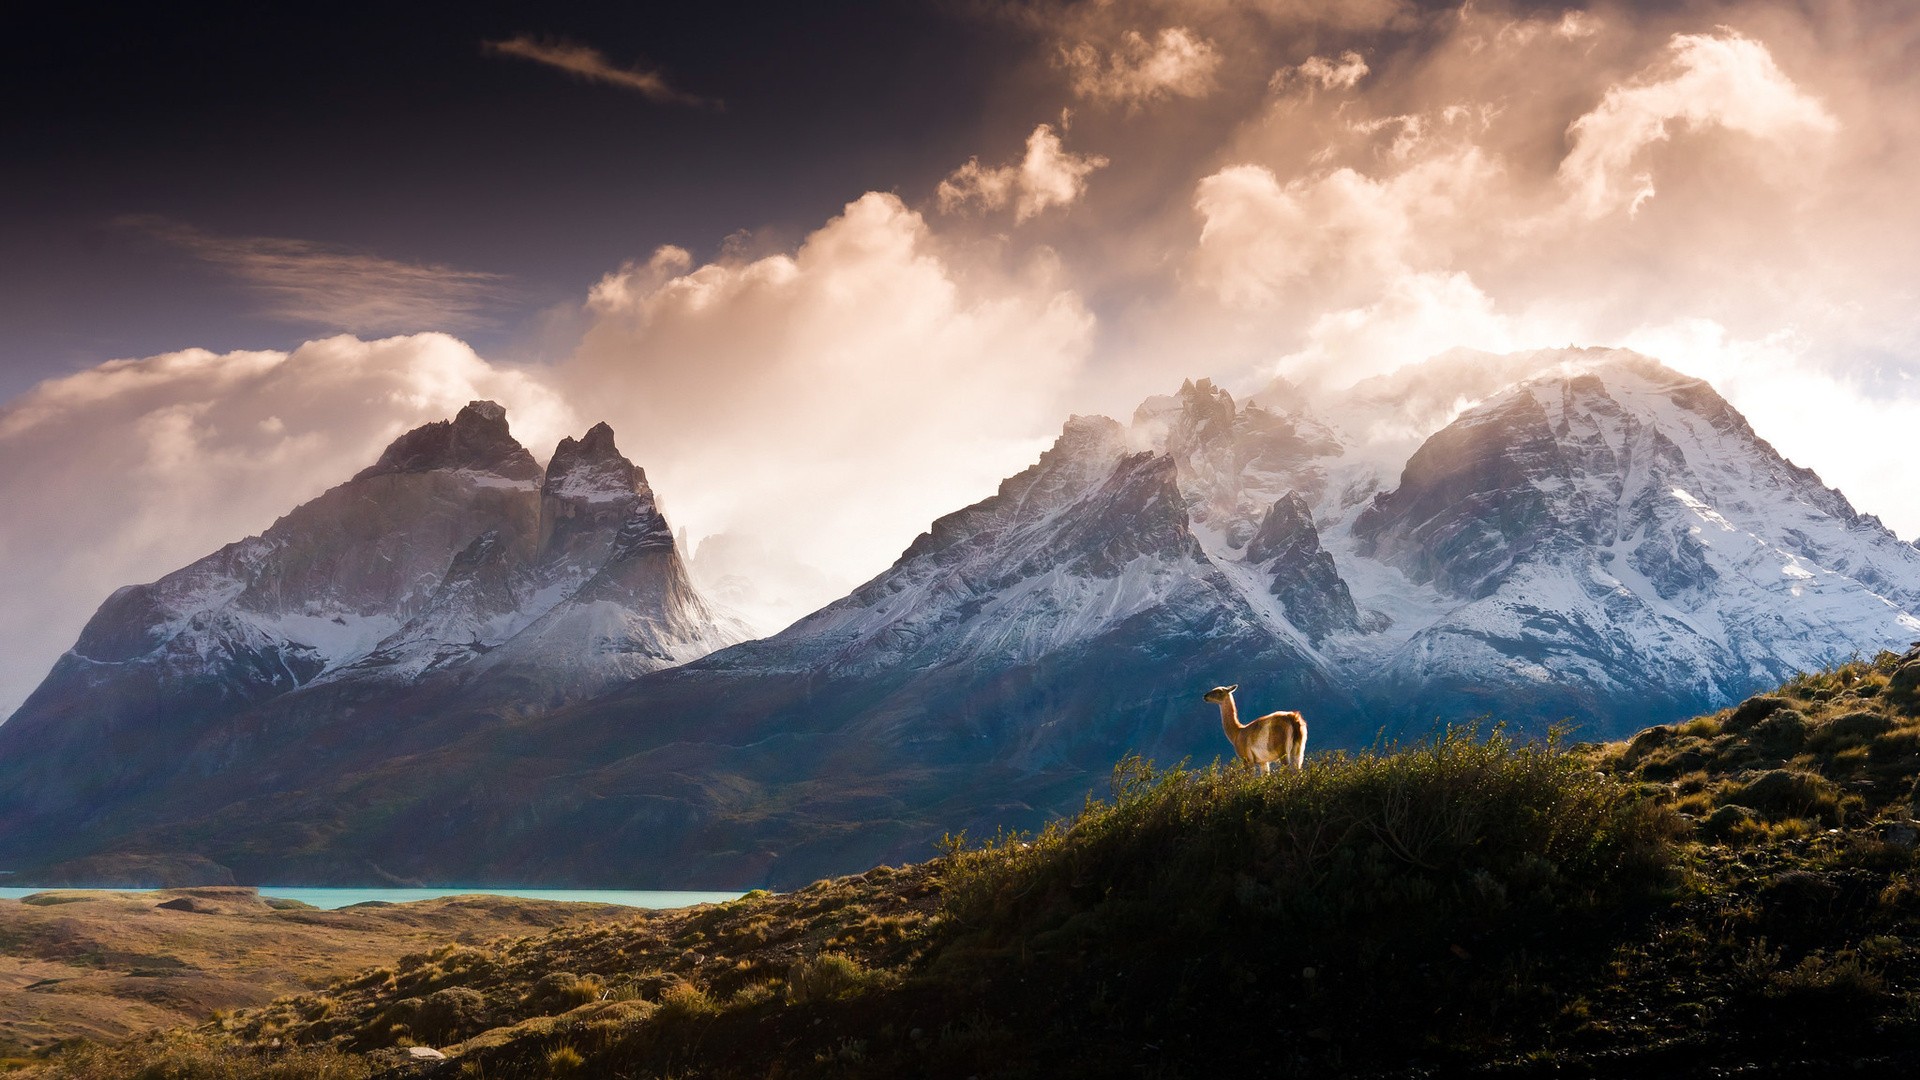 General 1920x1080 nature landscape mountains clouds trees forest water Chile lake snow hills grass animals llamas Torres del Paine South America